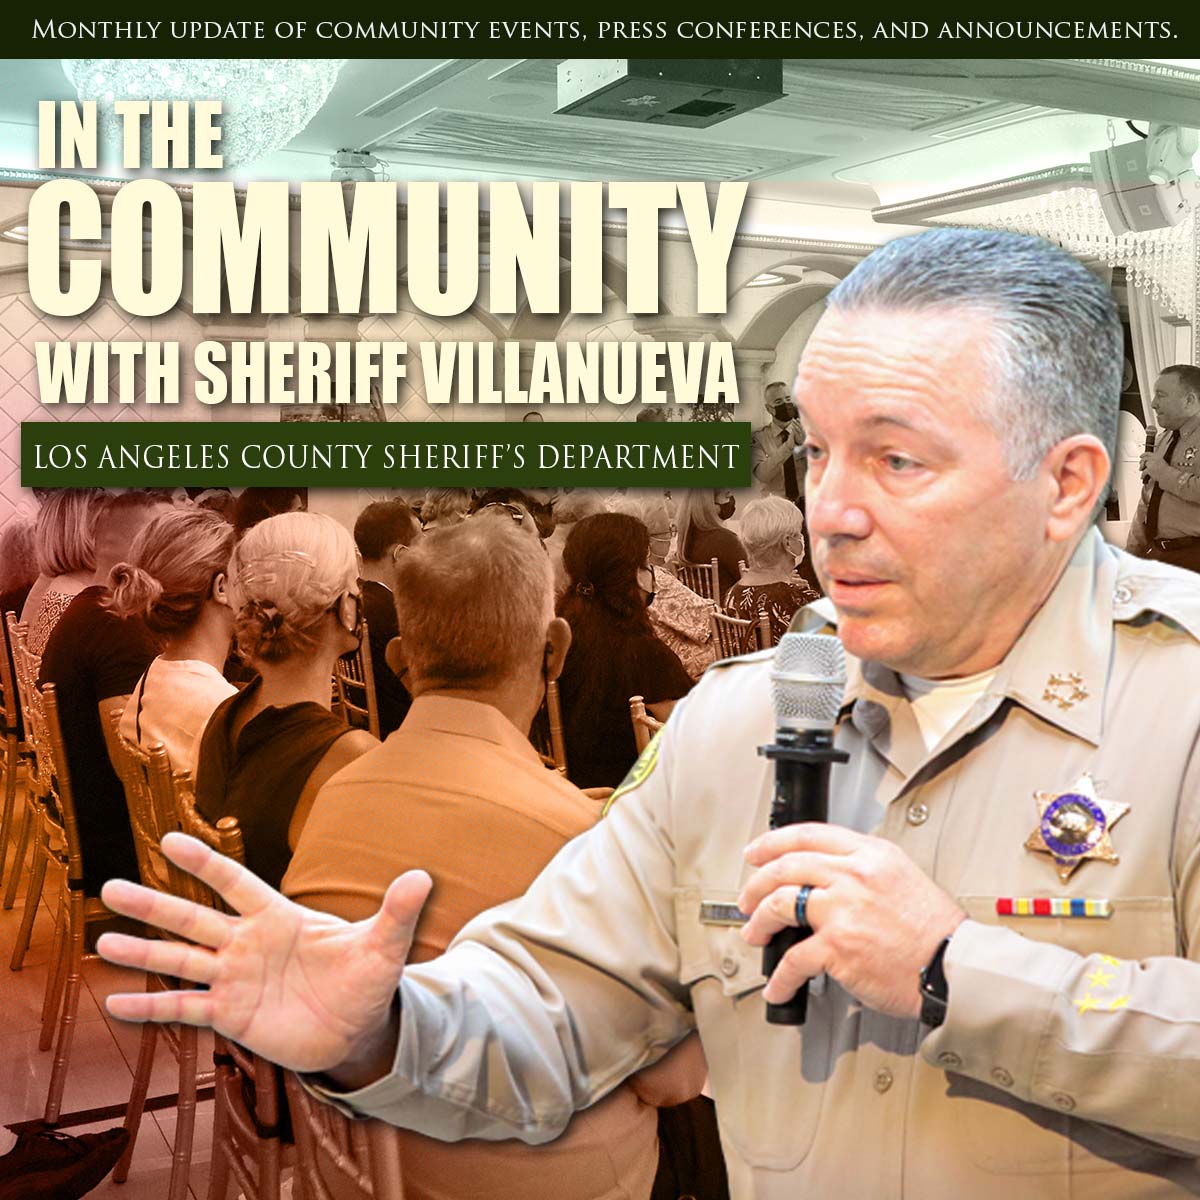 Newsletter is out! Featured topics include: Valor Awards Ceremony, 2nd Annual Fix’N Fidos Golf Tournament, Fentanyl Seizure at LAX, and LASD CAC First Prayer Breakfast. Newsletter link: content.govdelivery.com/accounts/CALAC…